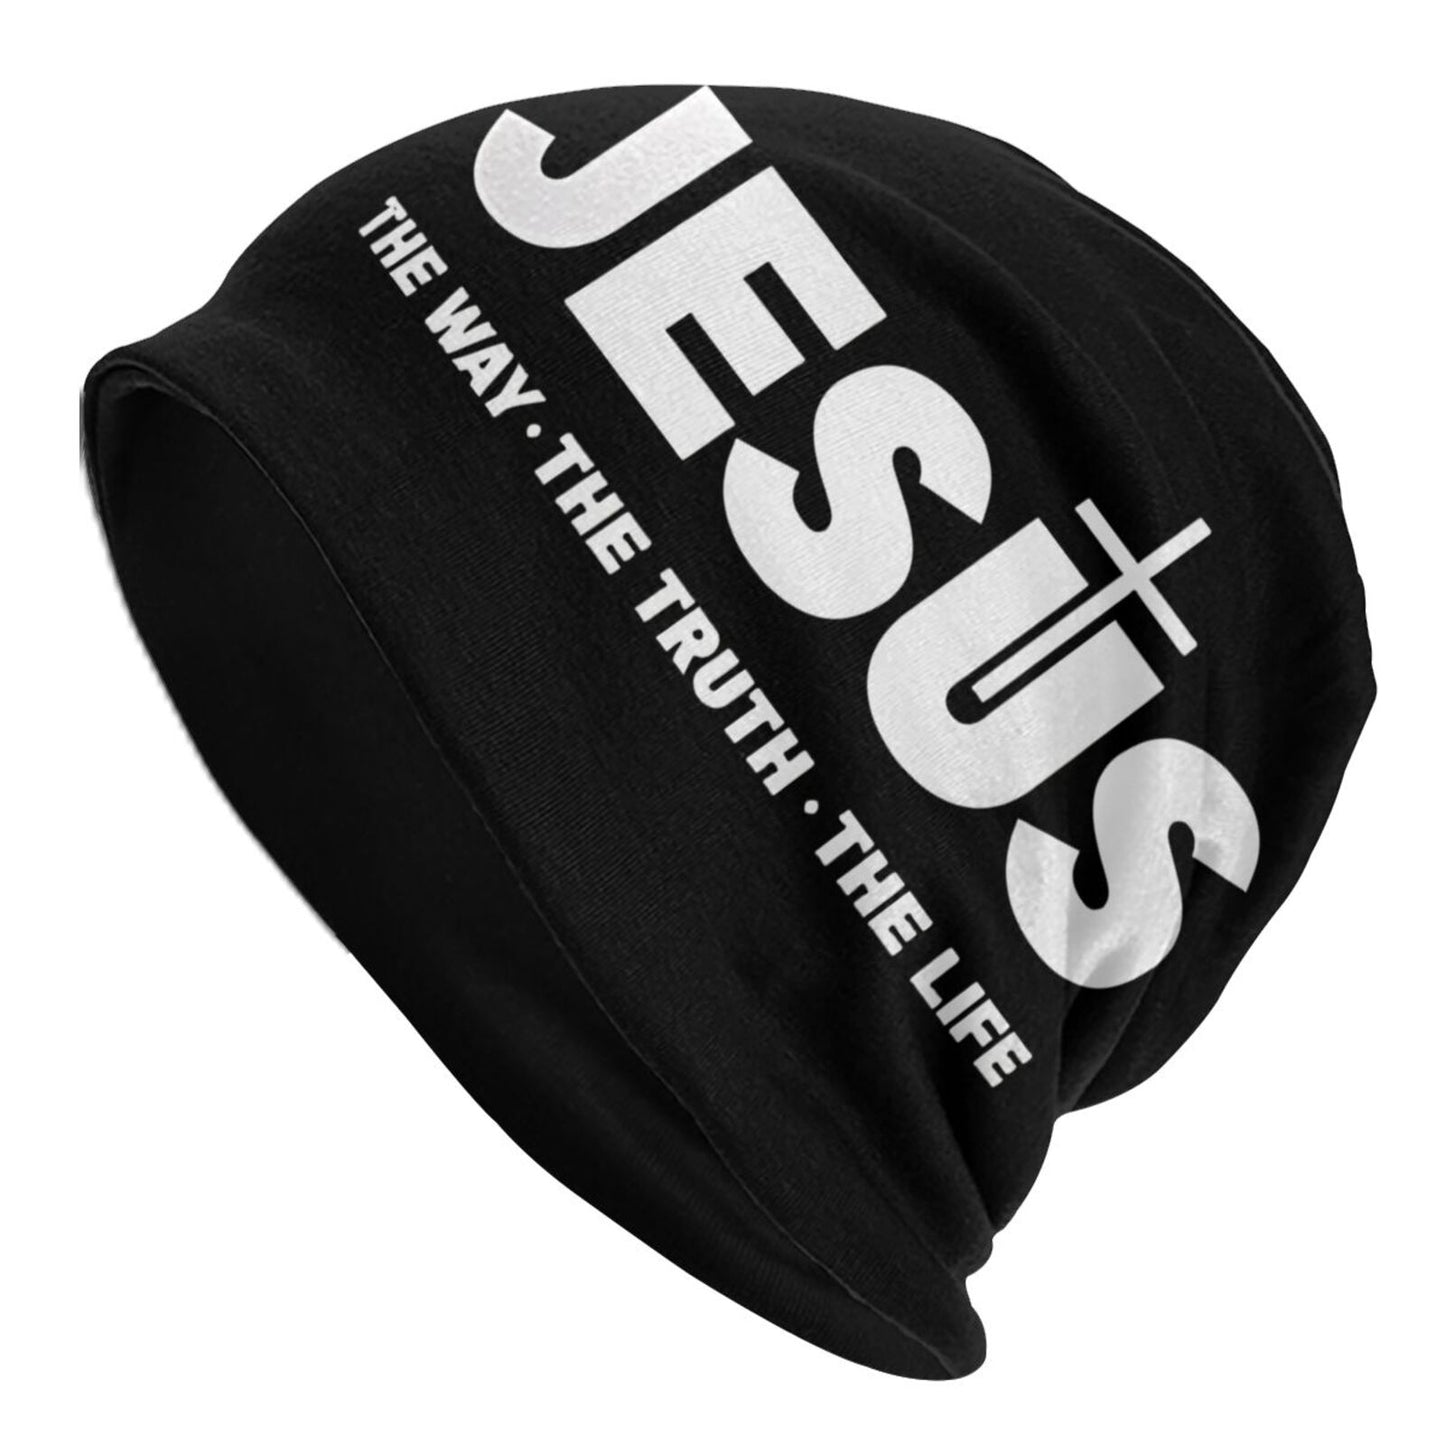 1pc Jesus Christ Bonnet Hats Thin Skullies Beanies Hat With The Way The Truth For Autumn Spring Cycling